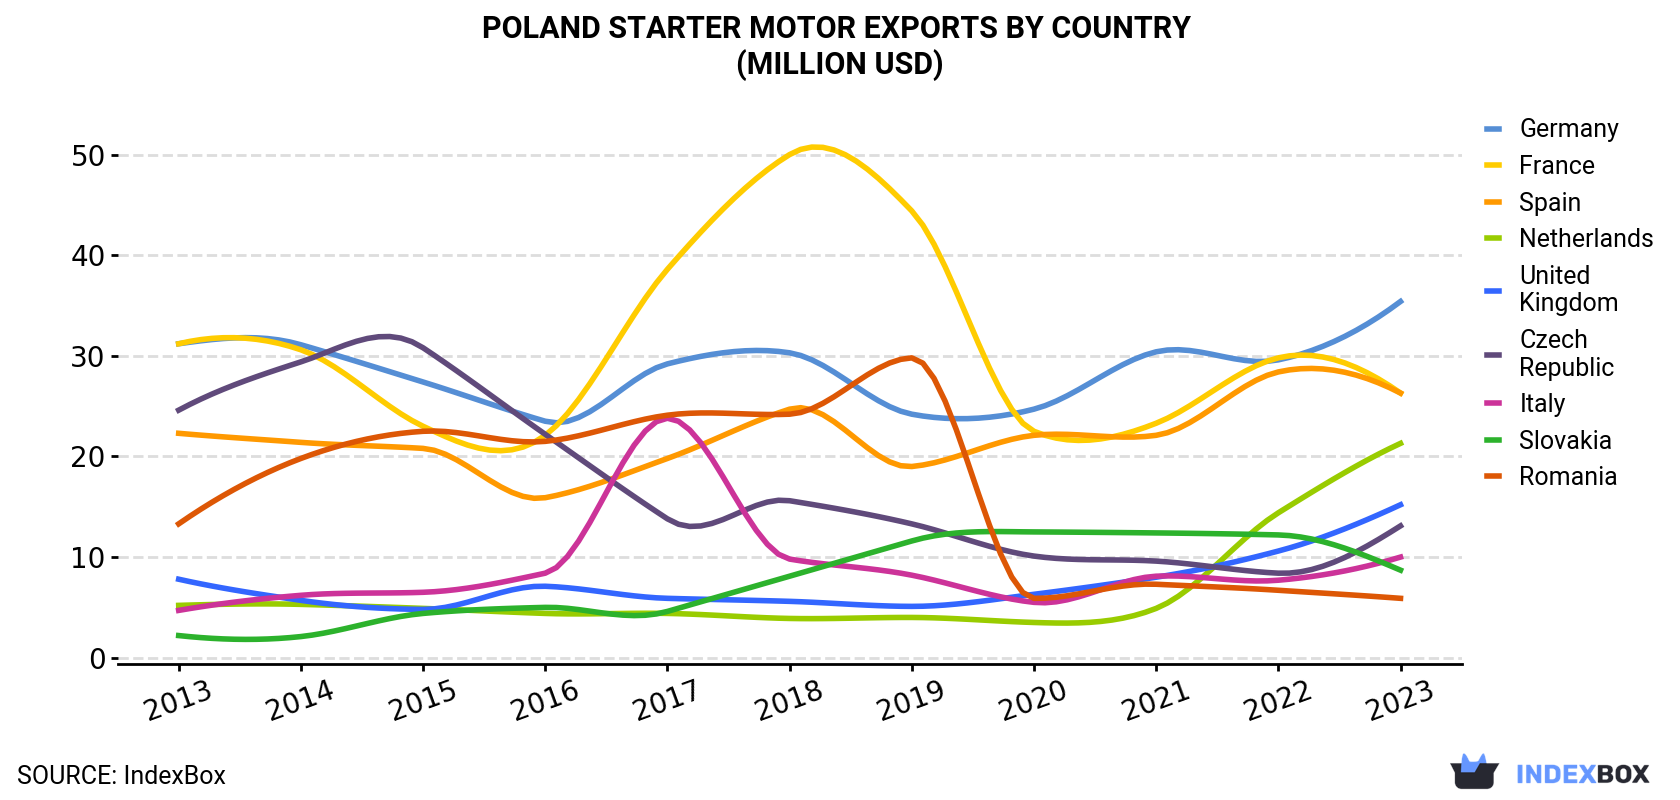 Poland Starter Motor Exports By Country (Million USD)